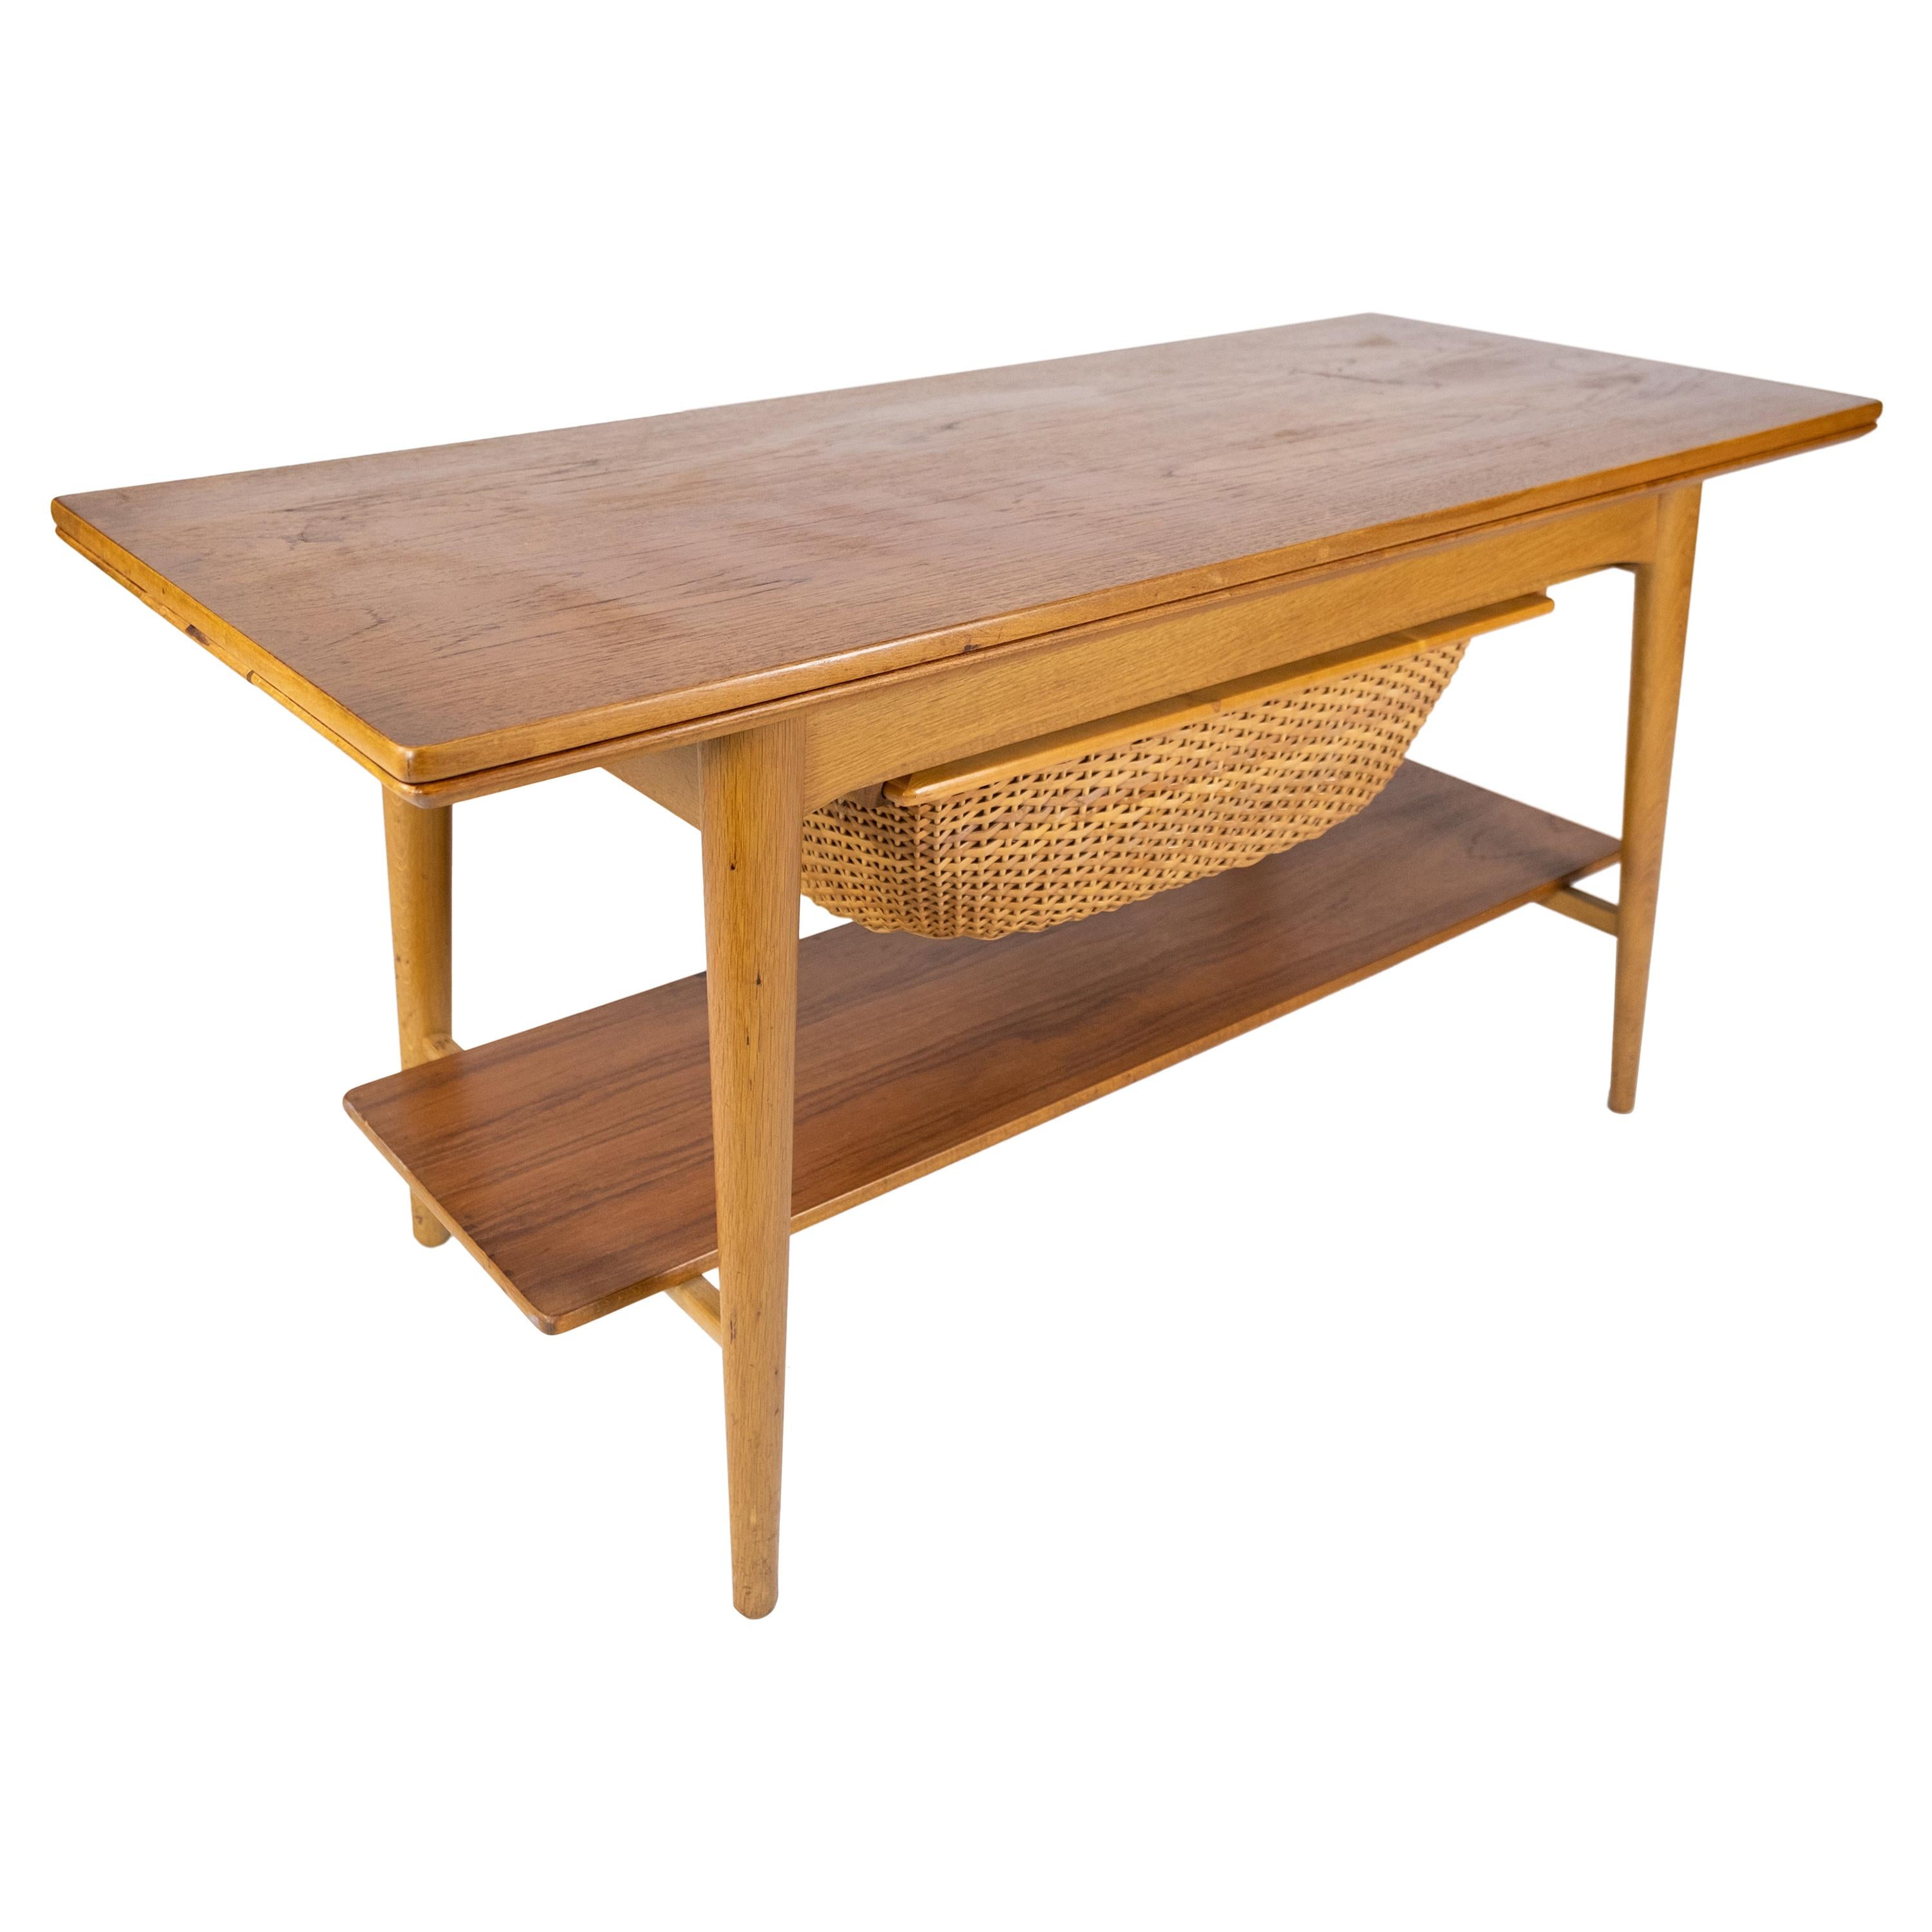 Coffee- and Sewing Table in Oak and Teak of Danish Design from the 1960s